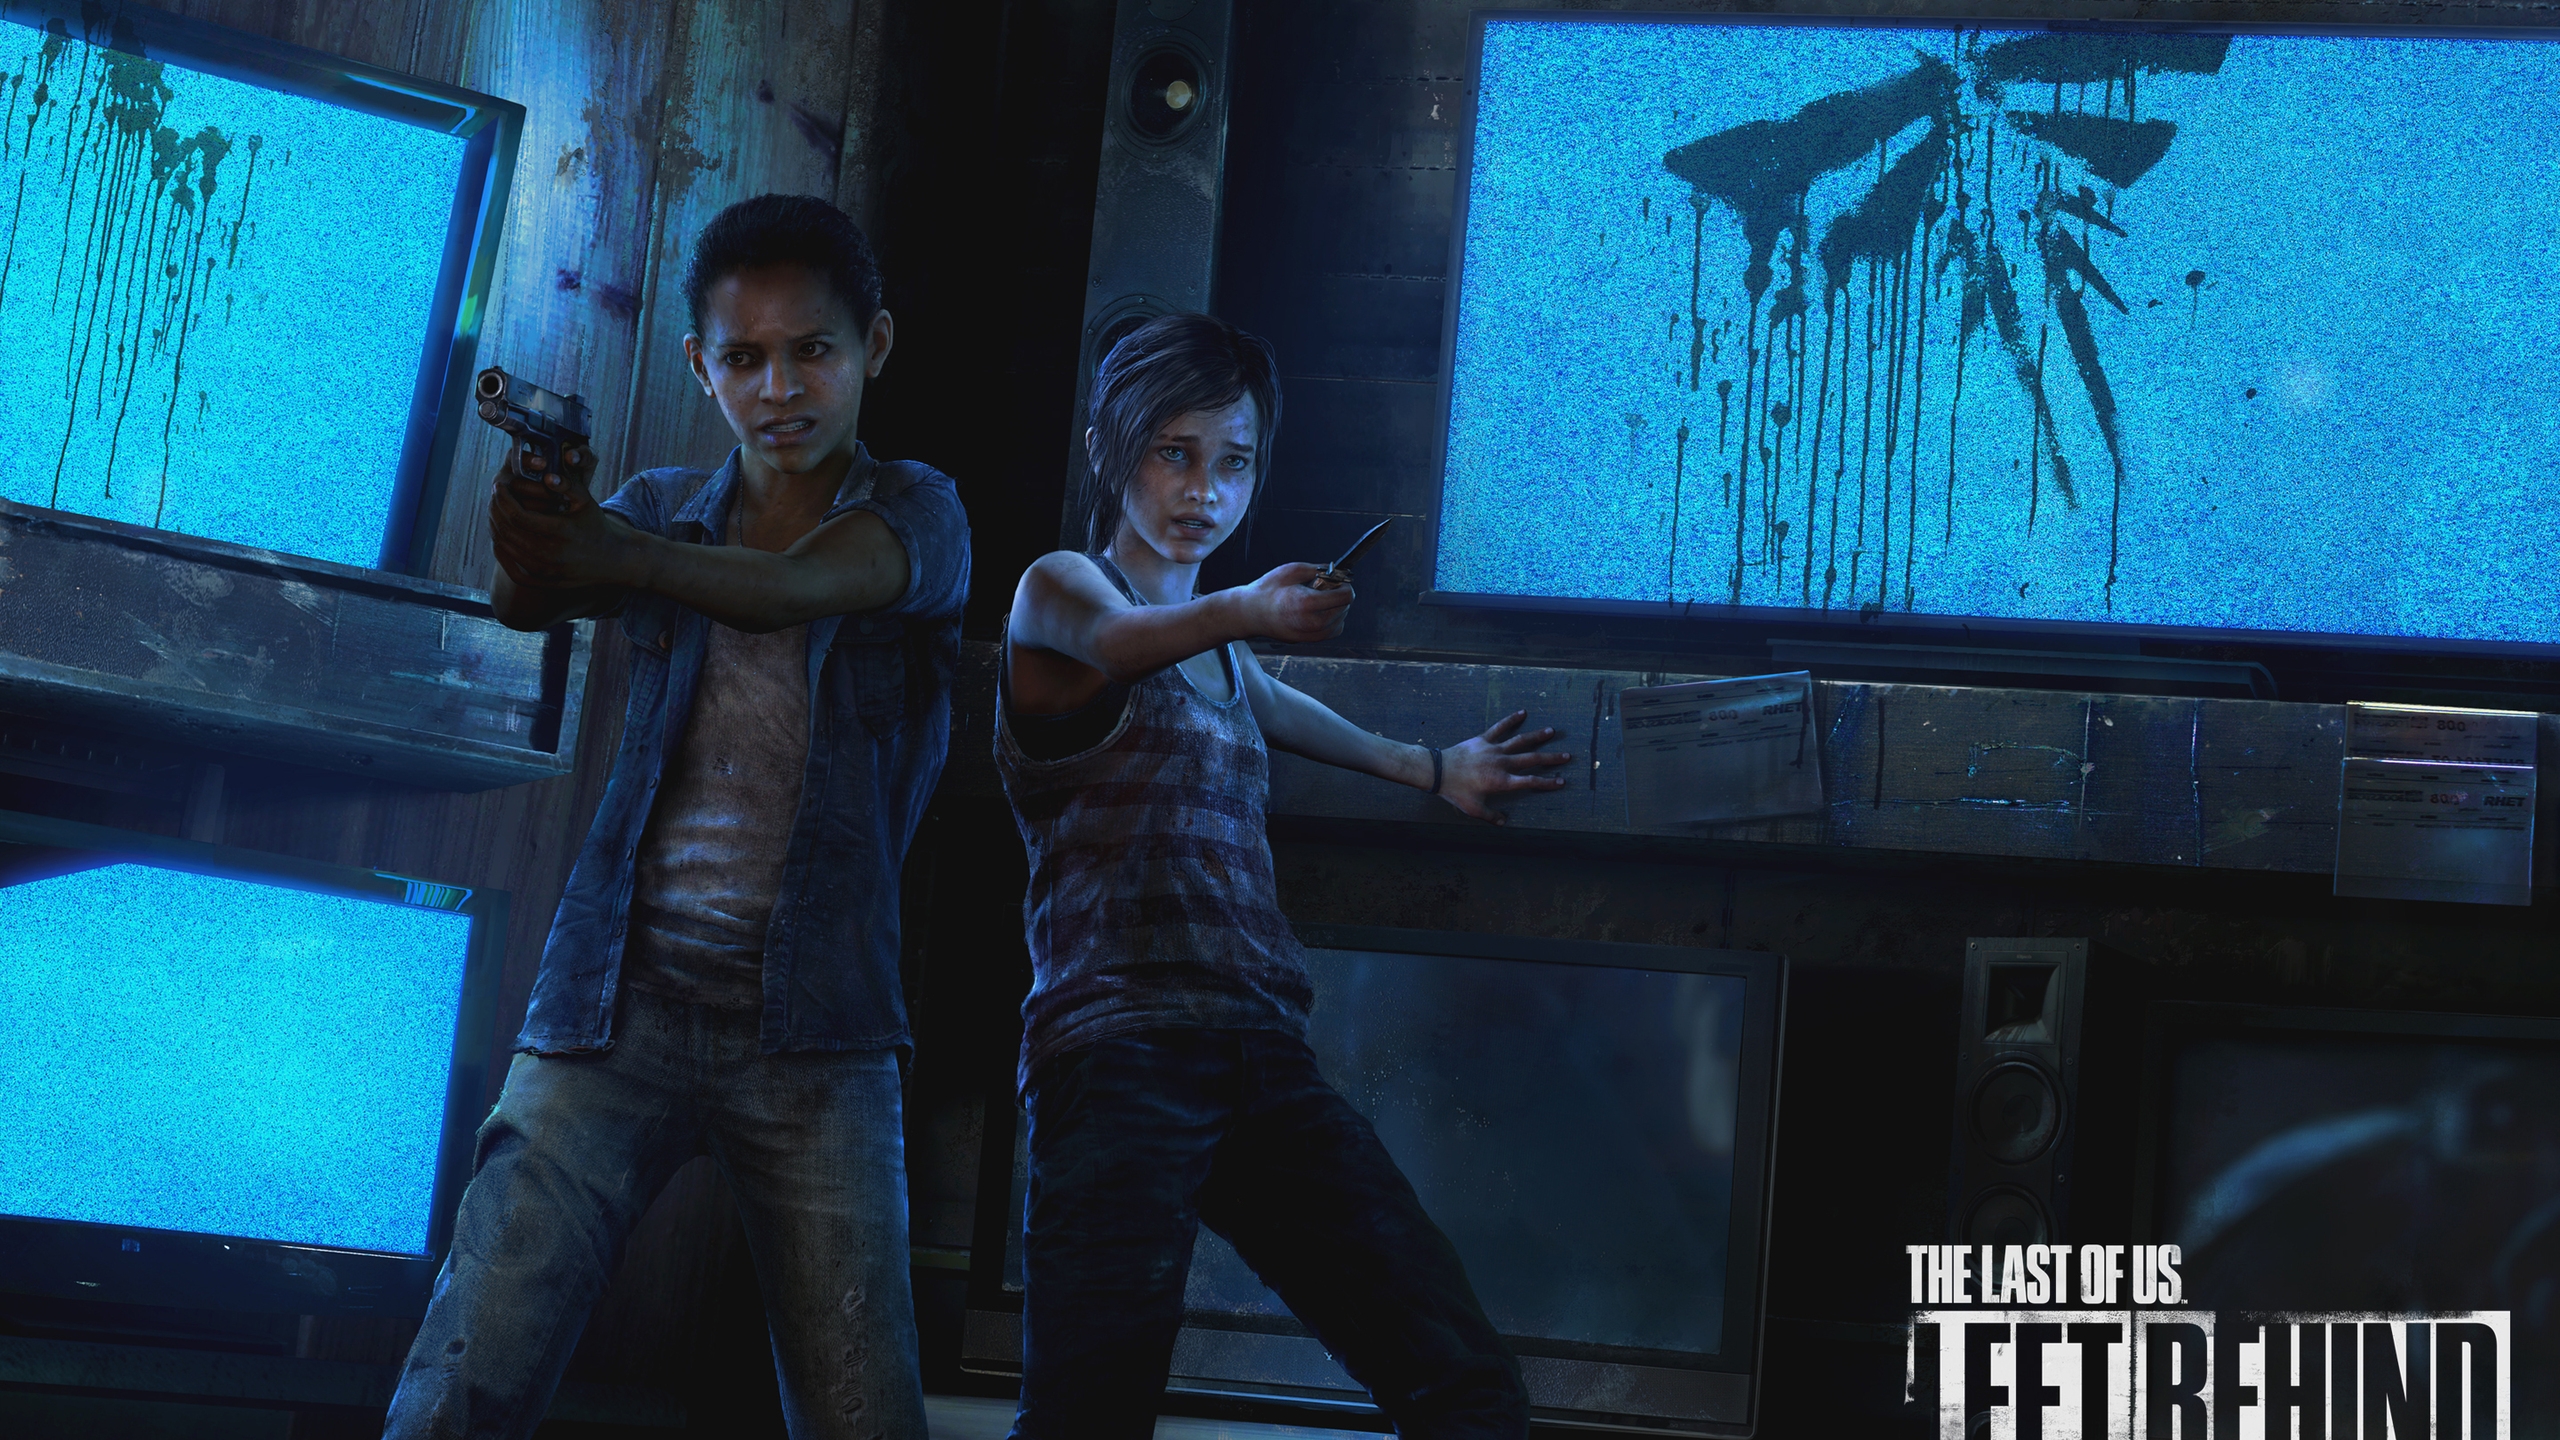 The Last Of Us Left Behind for 2560x1440 HDTV resolution